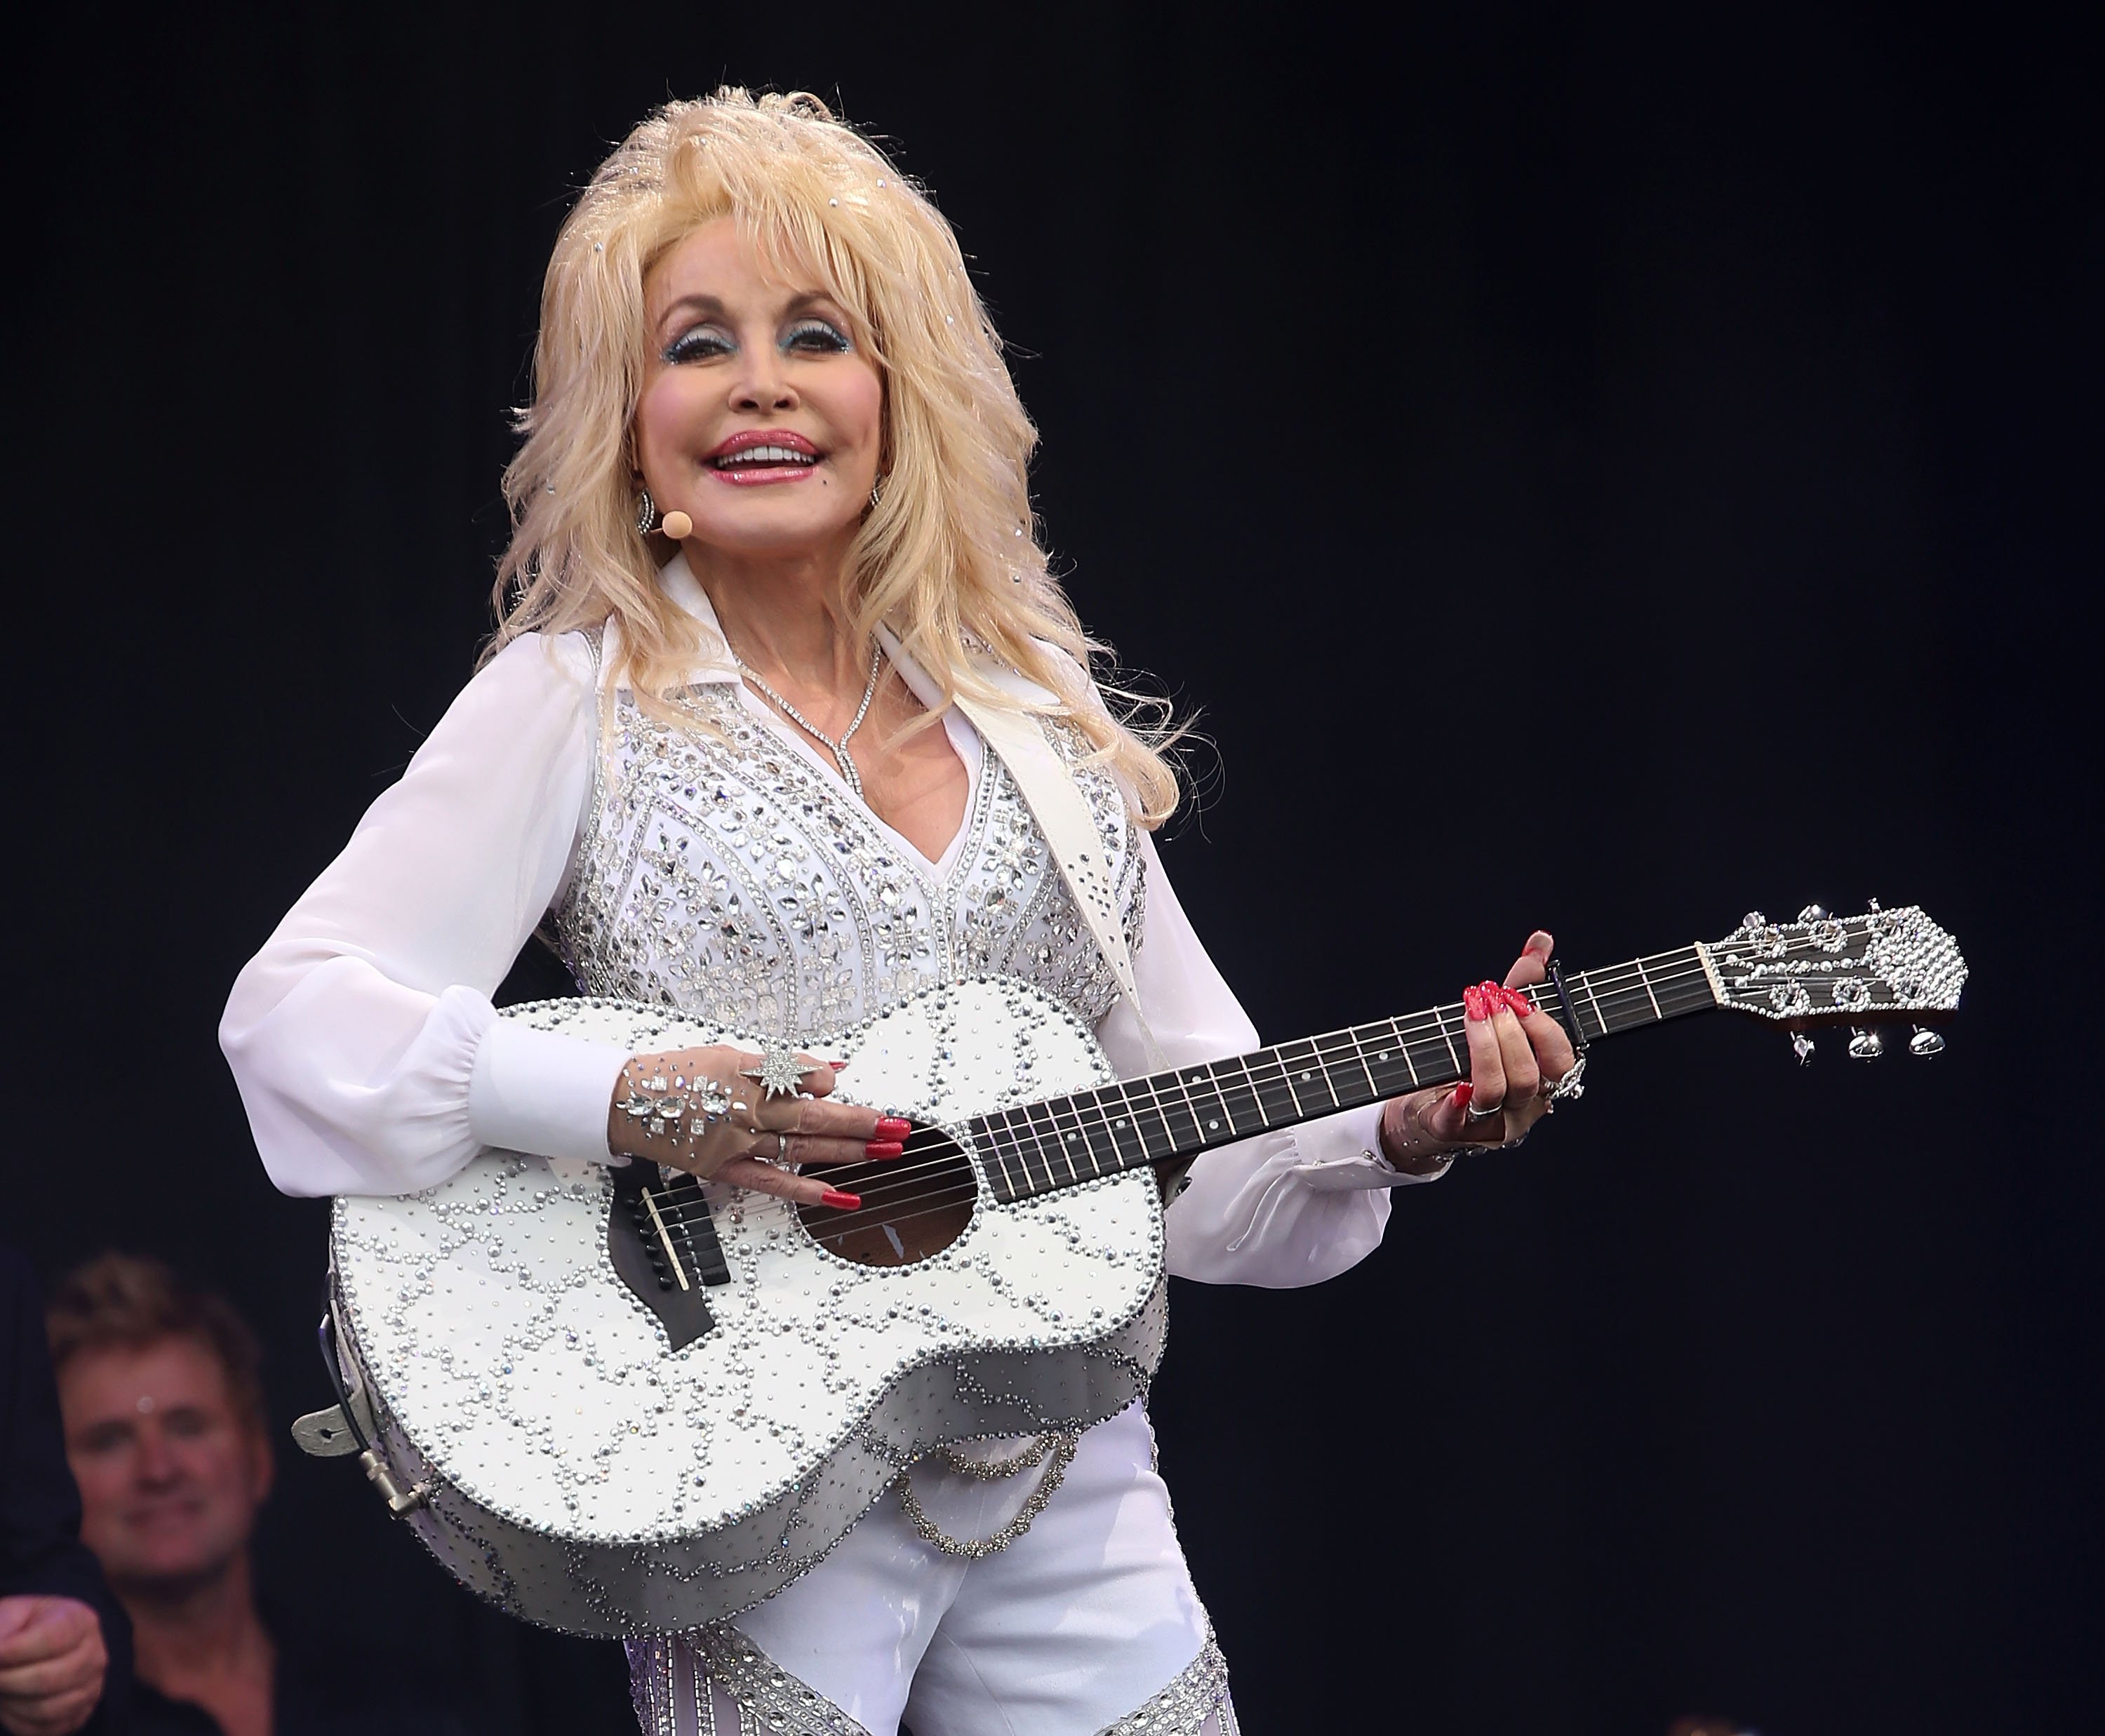 Dolly Parton performs at Glastonbury Festival in 2014